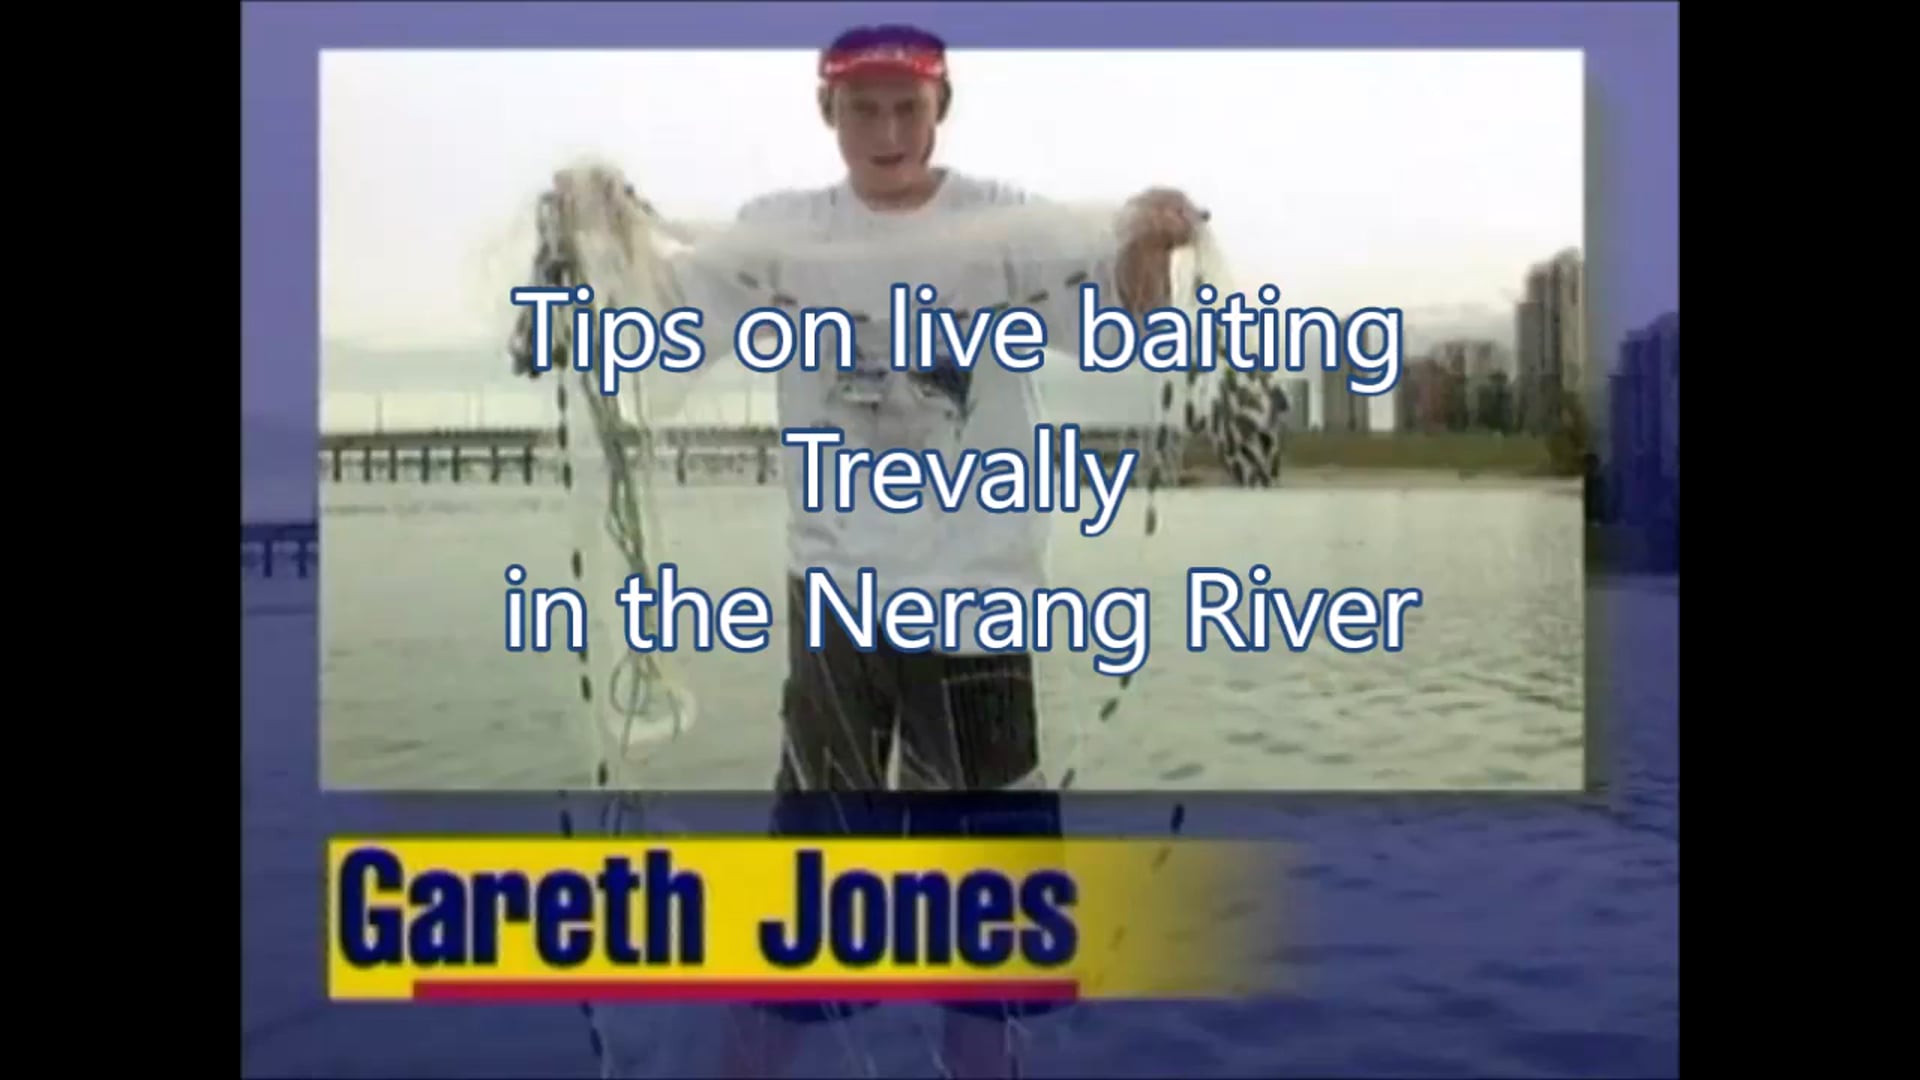 Live baiting trevally in the Nerang River